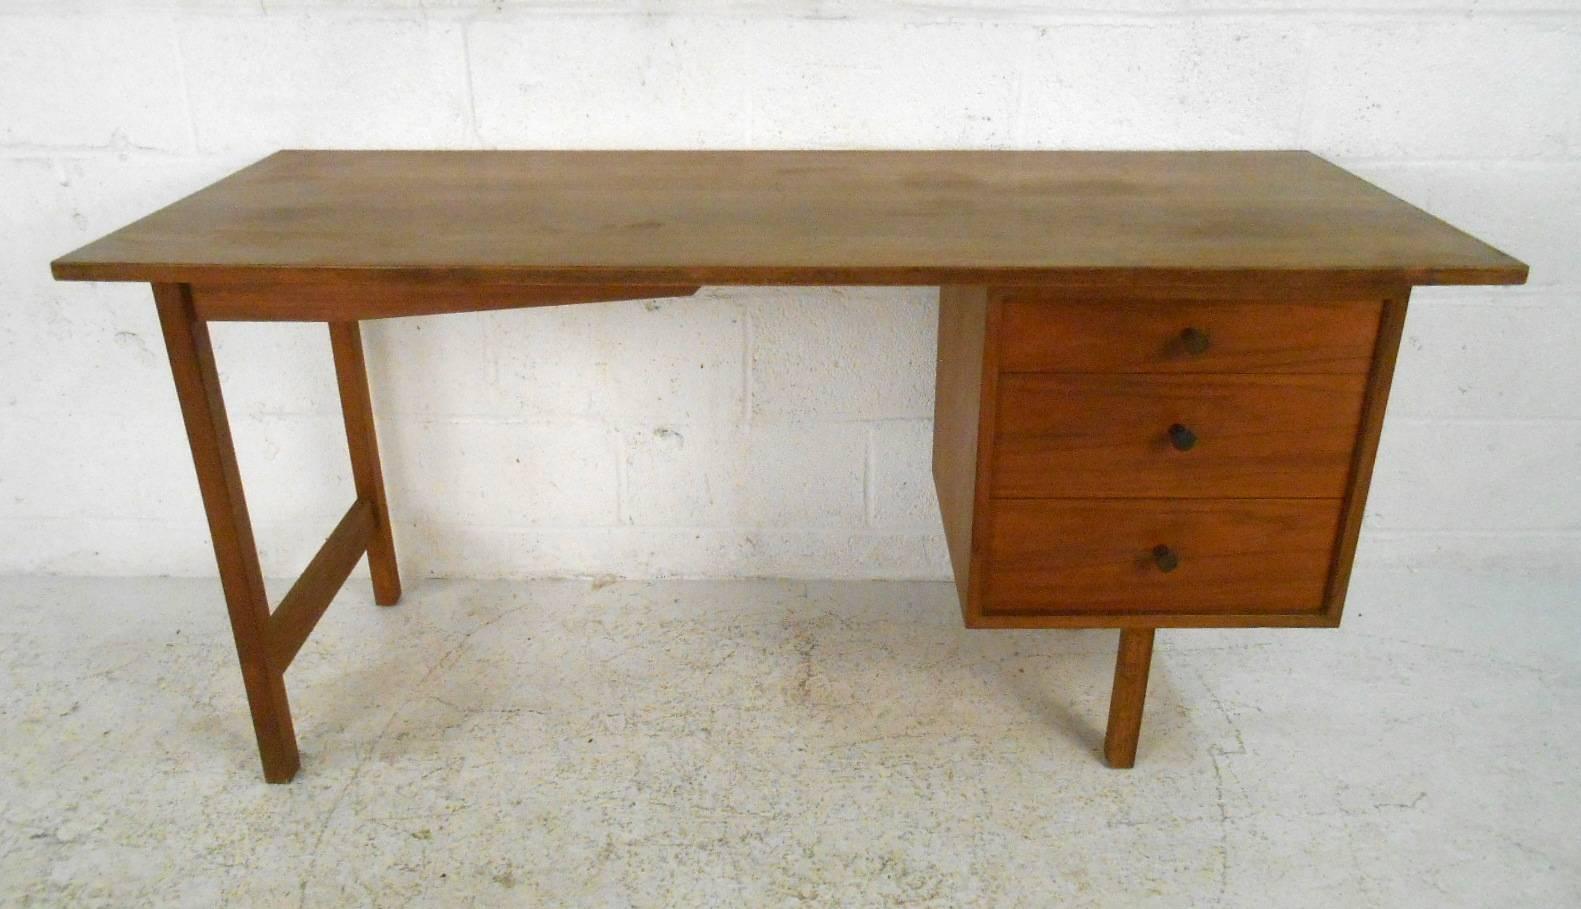 This gorgeous vintage modern desk features three hefty drawers and a large top ensuring plenty of work space. Quality craftsmanship with a finished back and a lovely walnut finish. Sturdy construction with straight lines and unique sculpted pulls